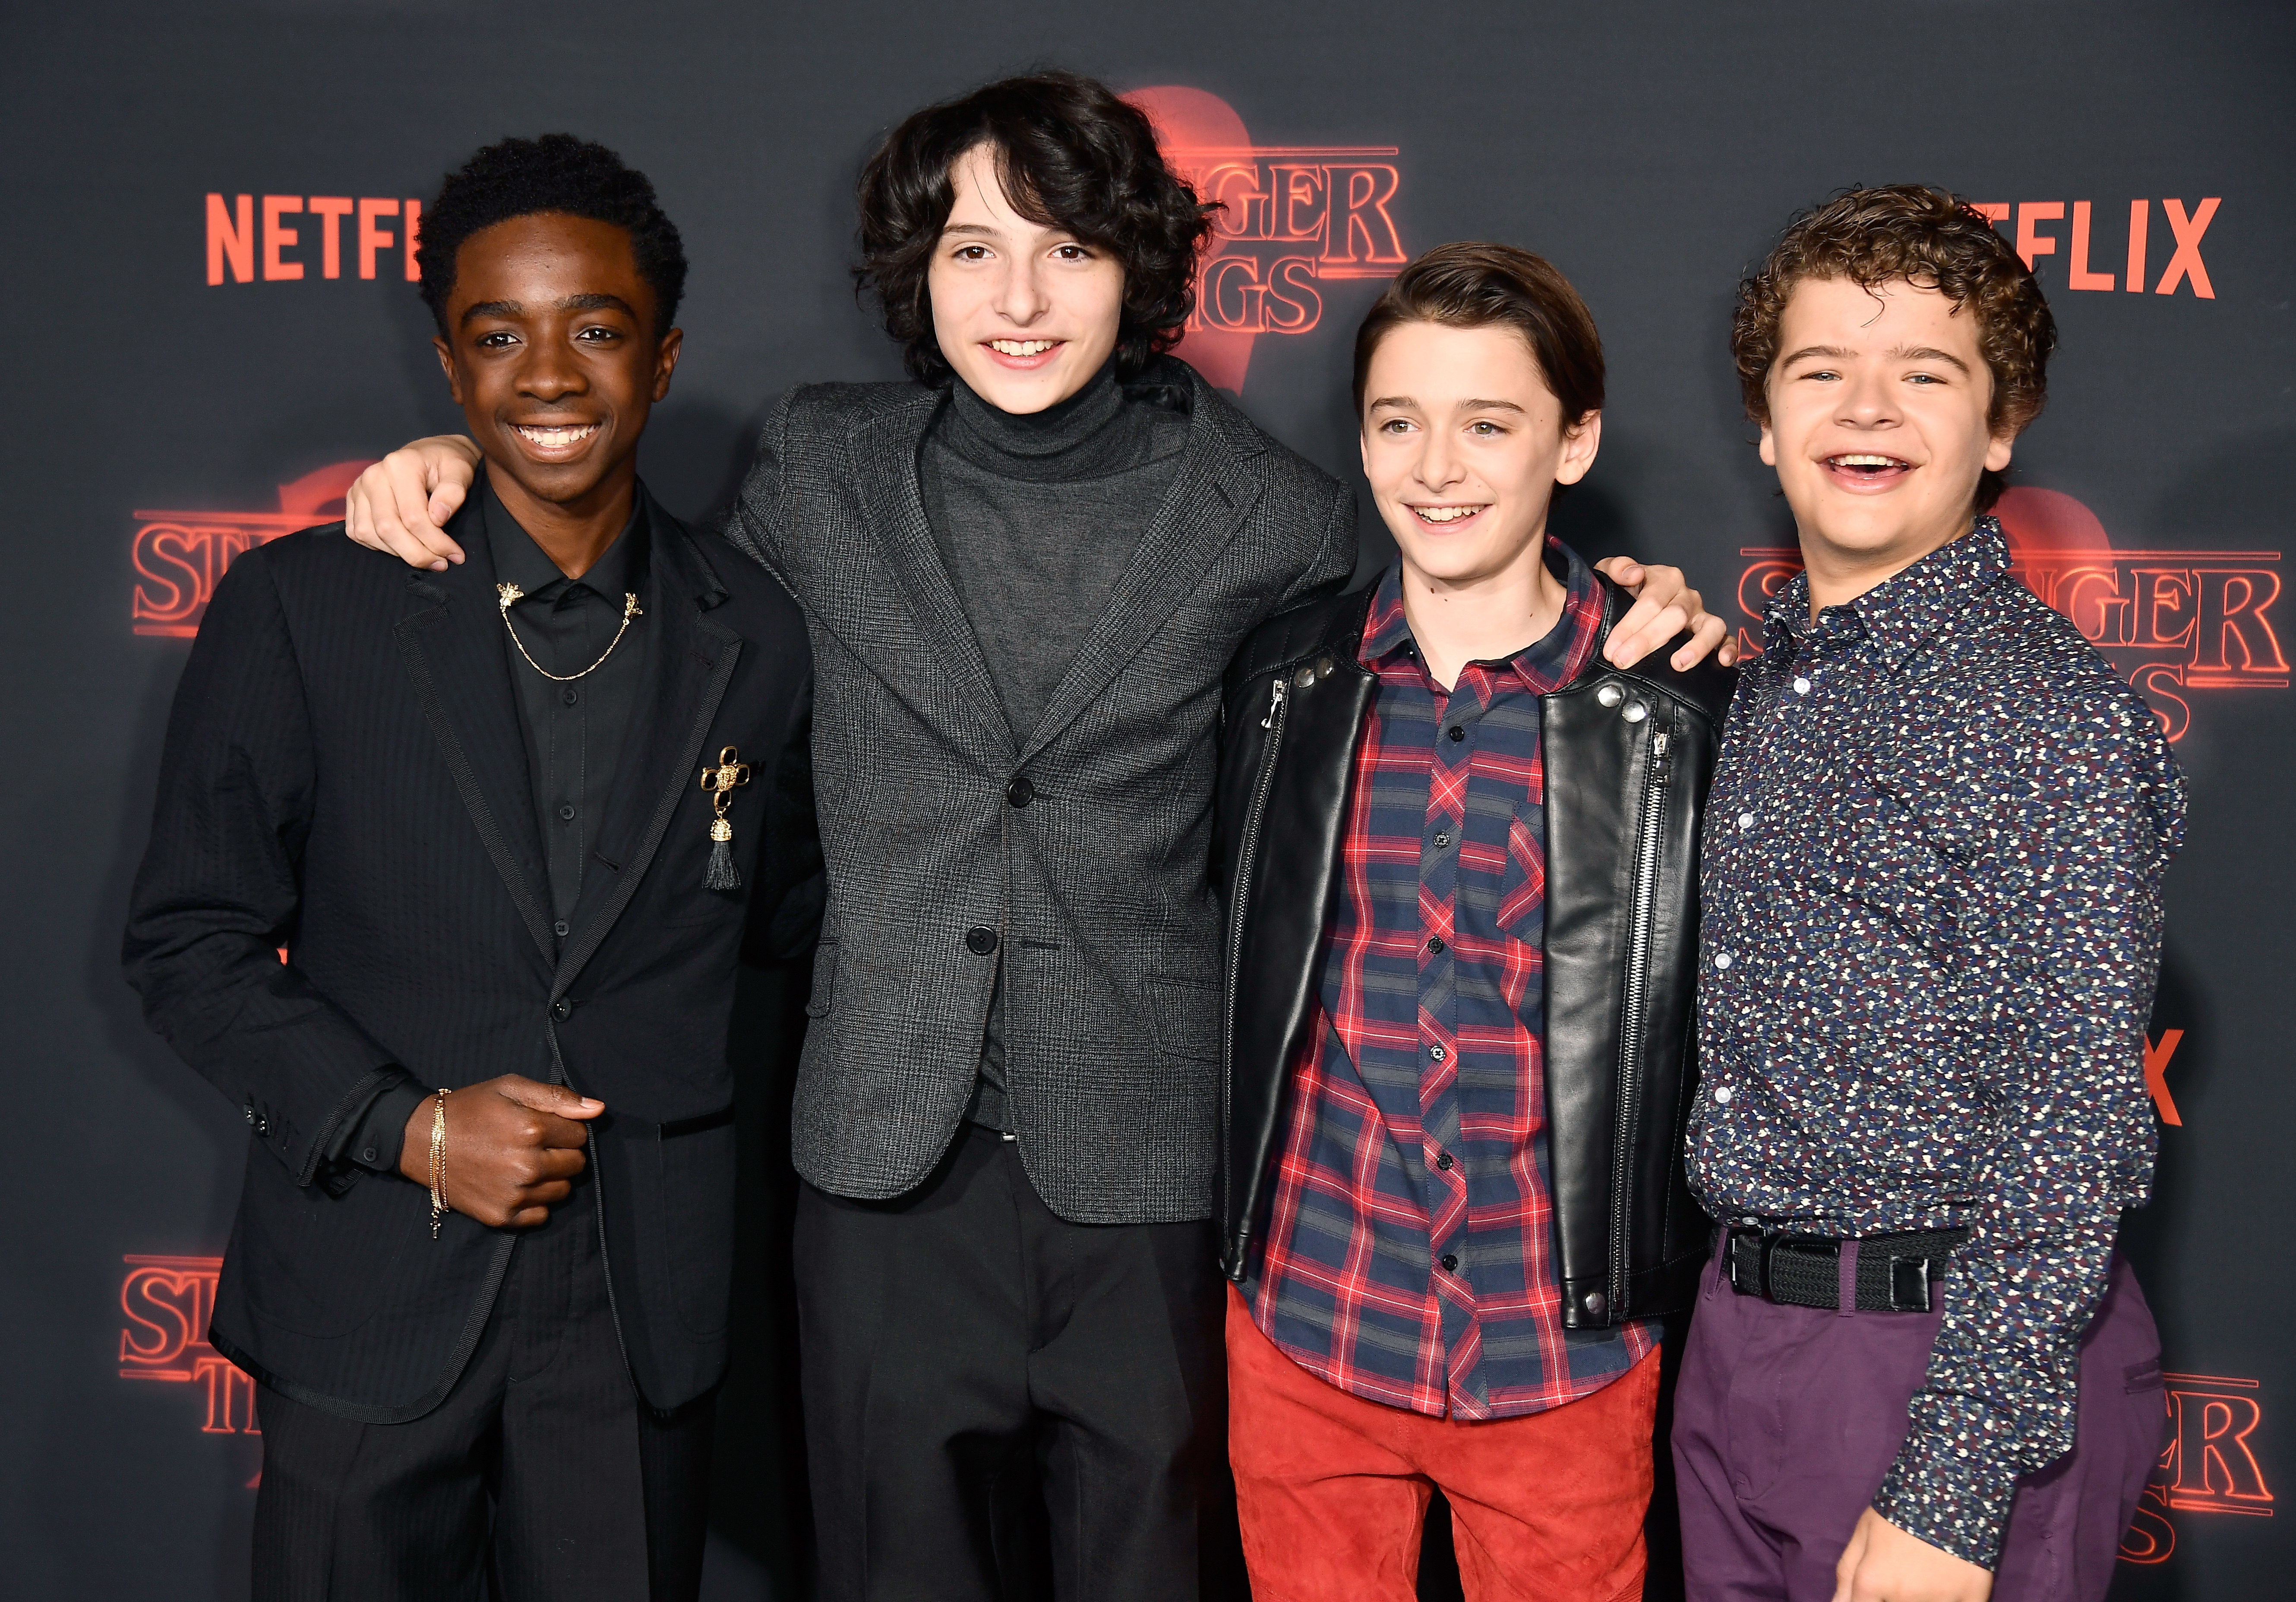 What Time Does Season 3 of 'Stranger Things Come Out on Netflix?